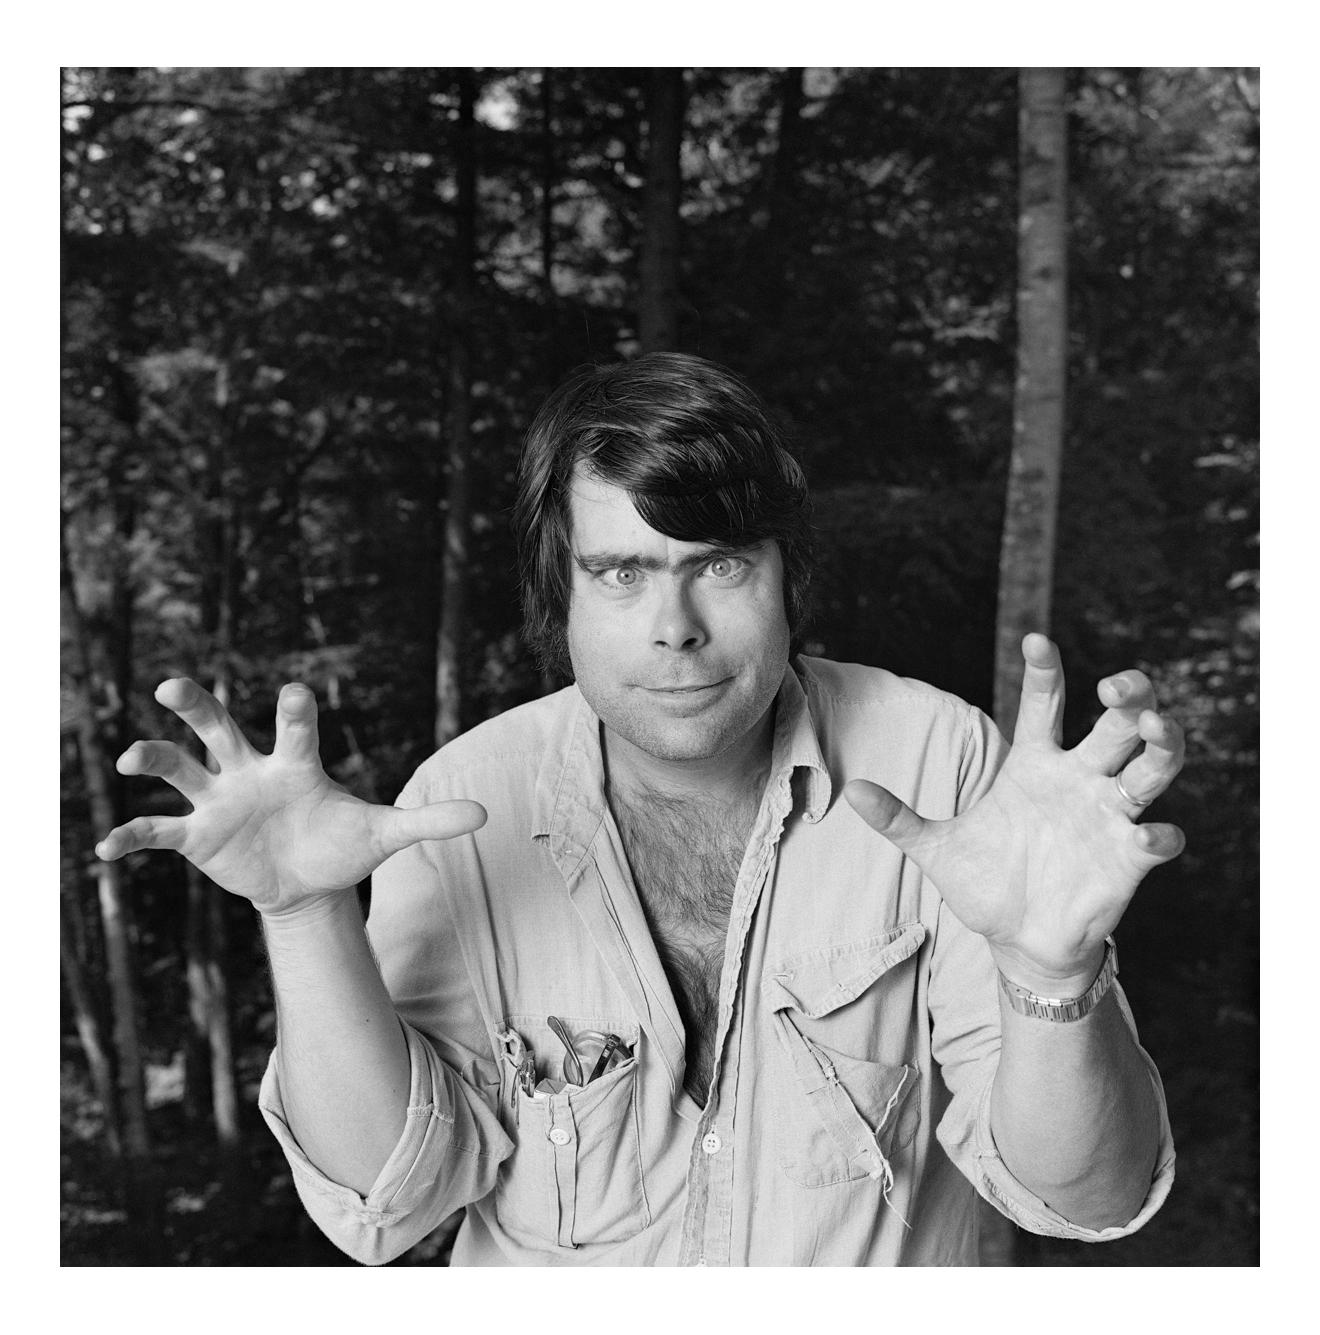 Stephen King in Lovell, Maine, 18 July 1980 - Black Portrait Photograph by Jonathan Becker